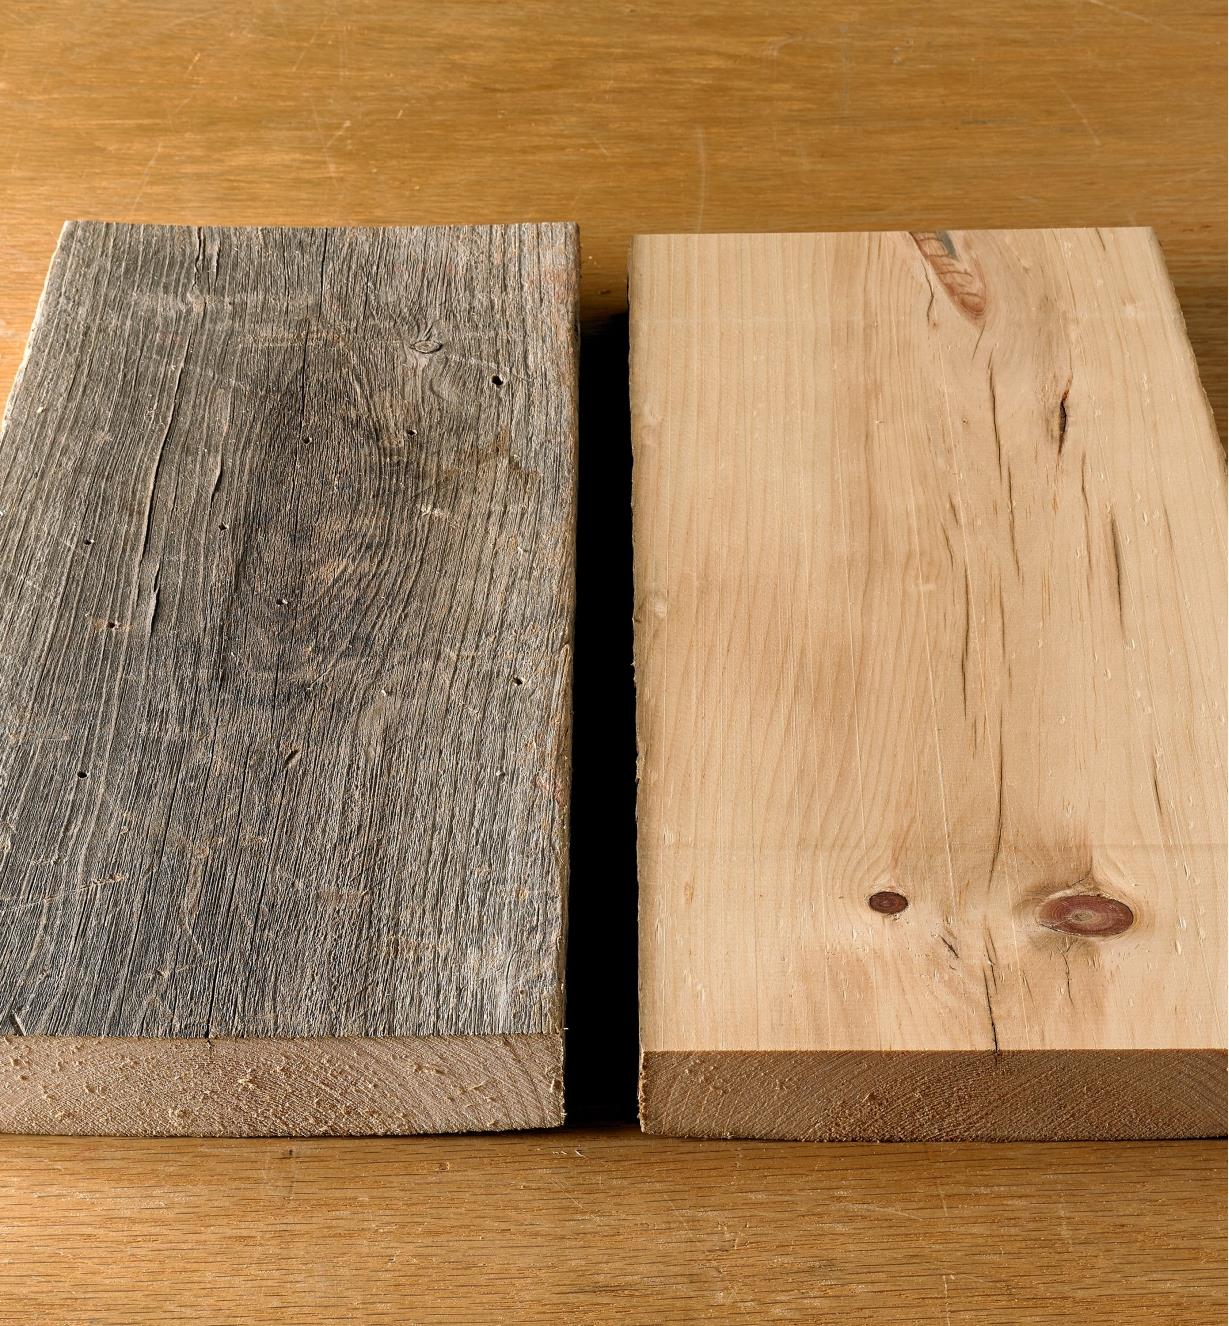 A curved plank with a rough surface on the left, and a flat, smooth plank on the right